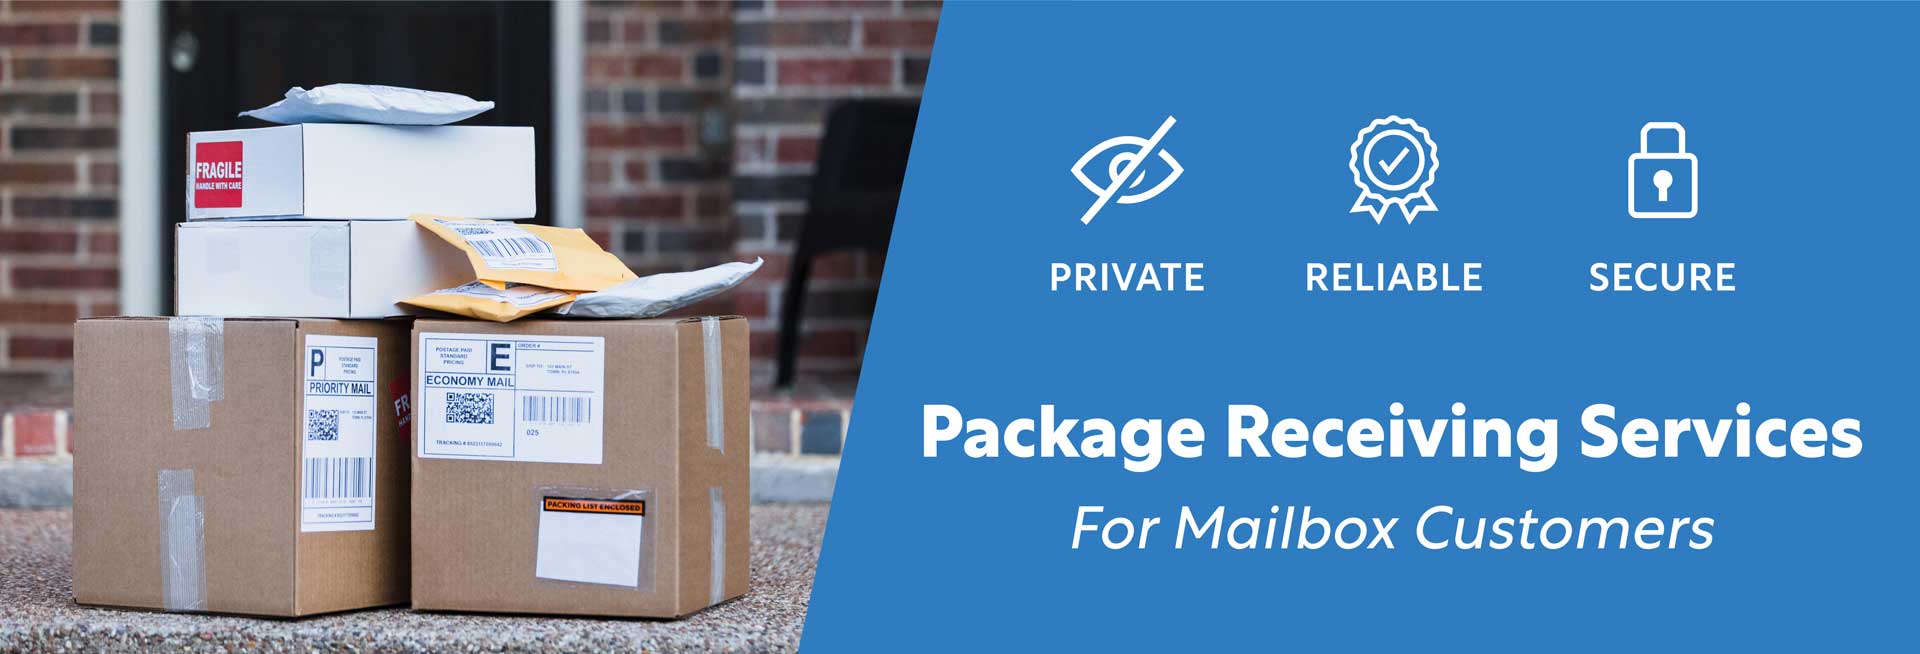 Package Receiving Services in Vancouver